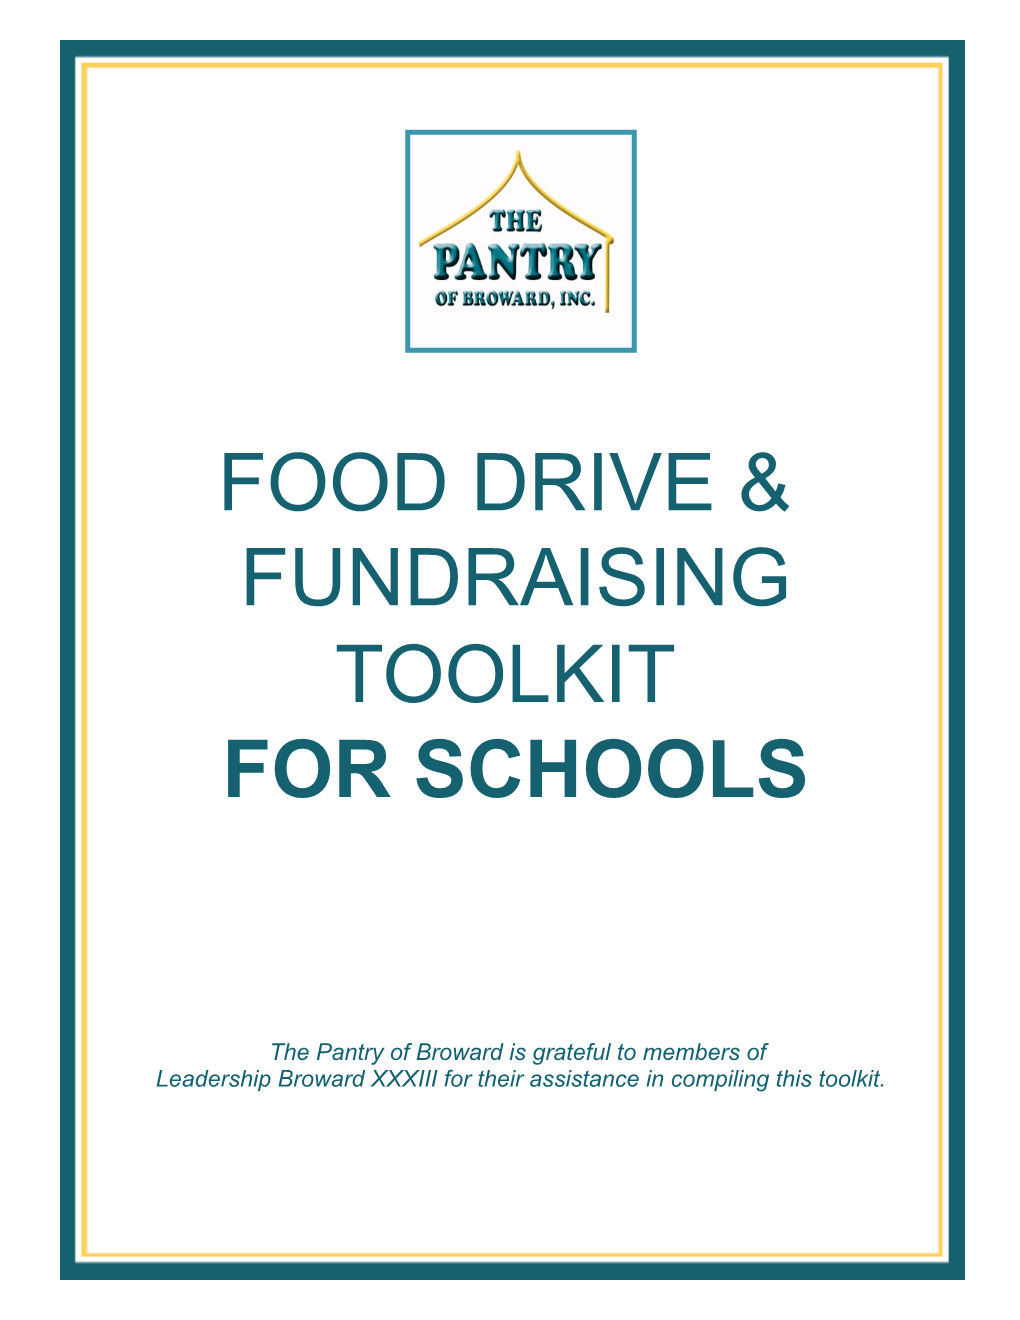 Food Drive & Fundraising Toolkit for Schools